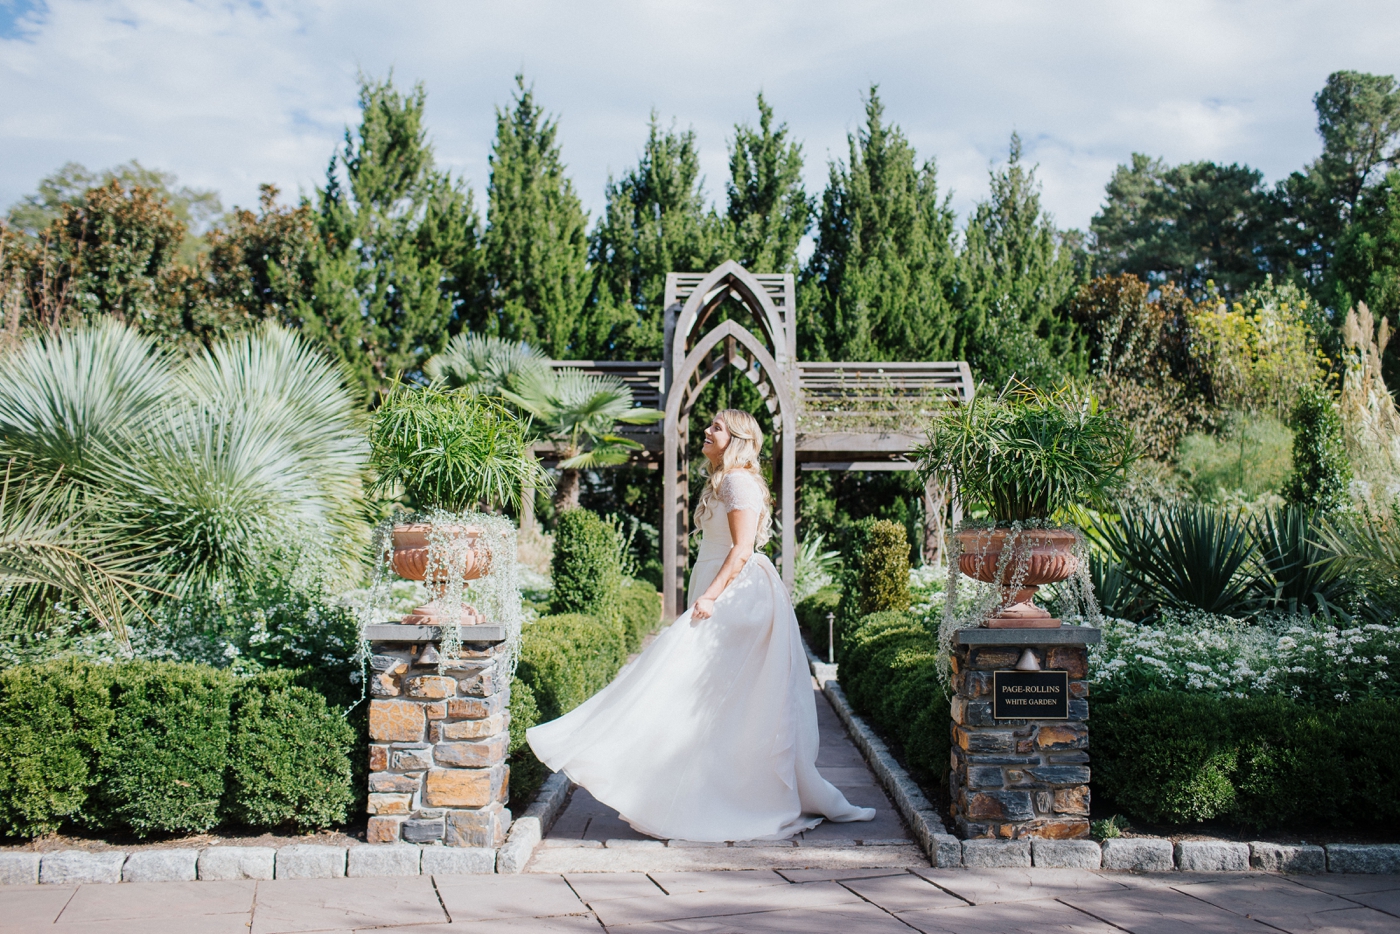 Garden wedding ceremony with Military inspiration | Izzy and Co.